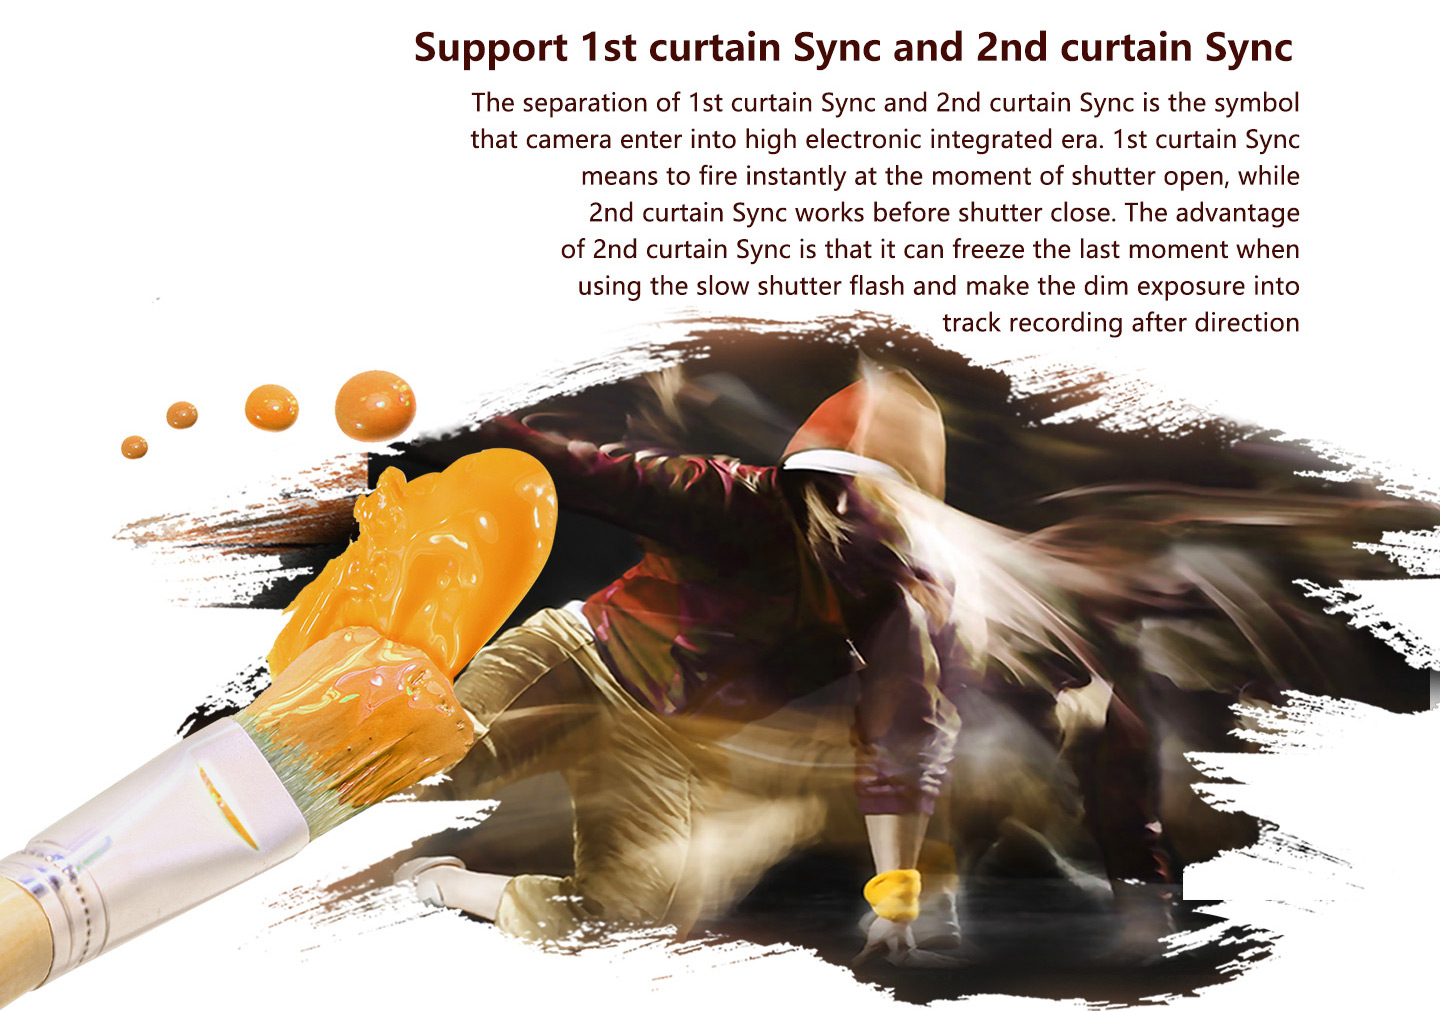 Support 1st curtain Sync and 2nd curtain Sync